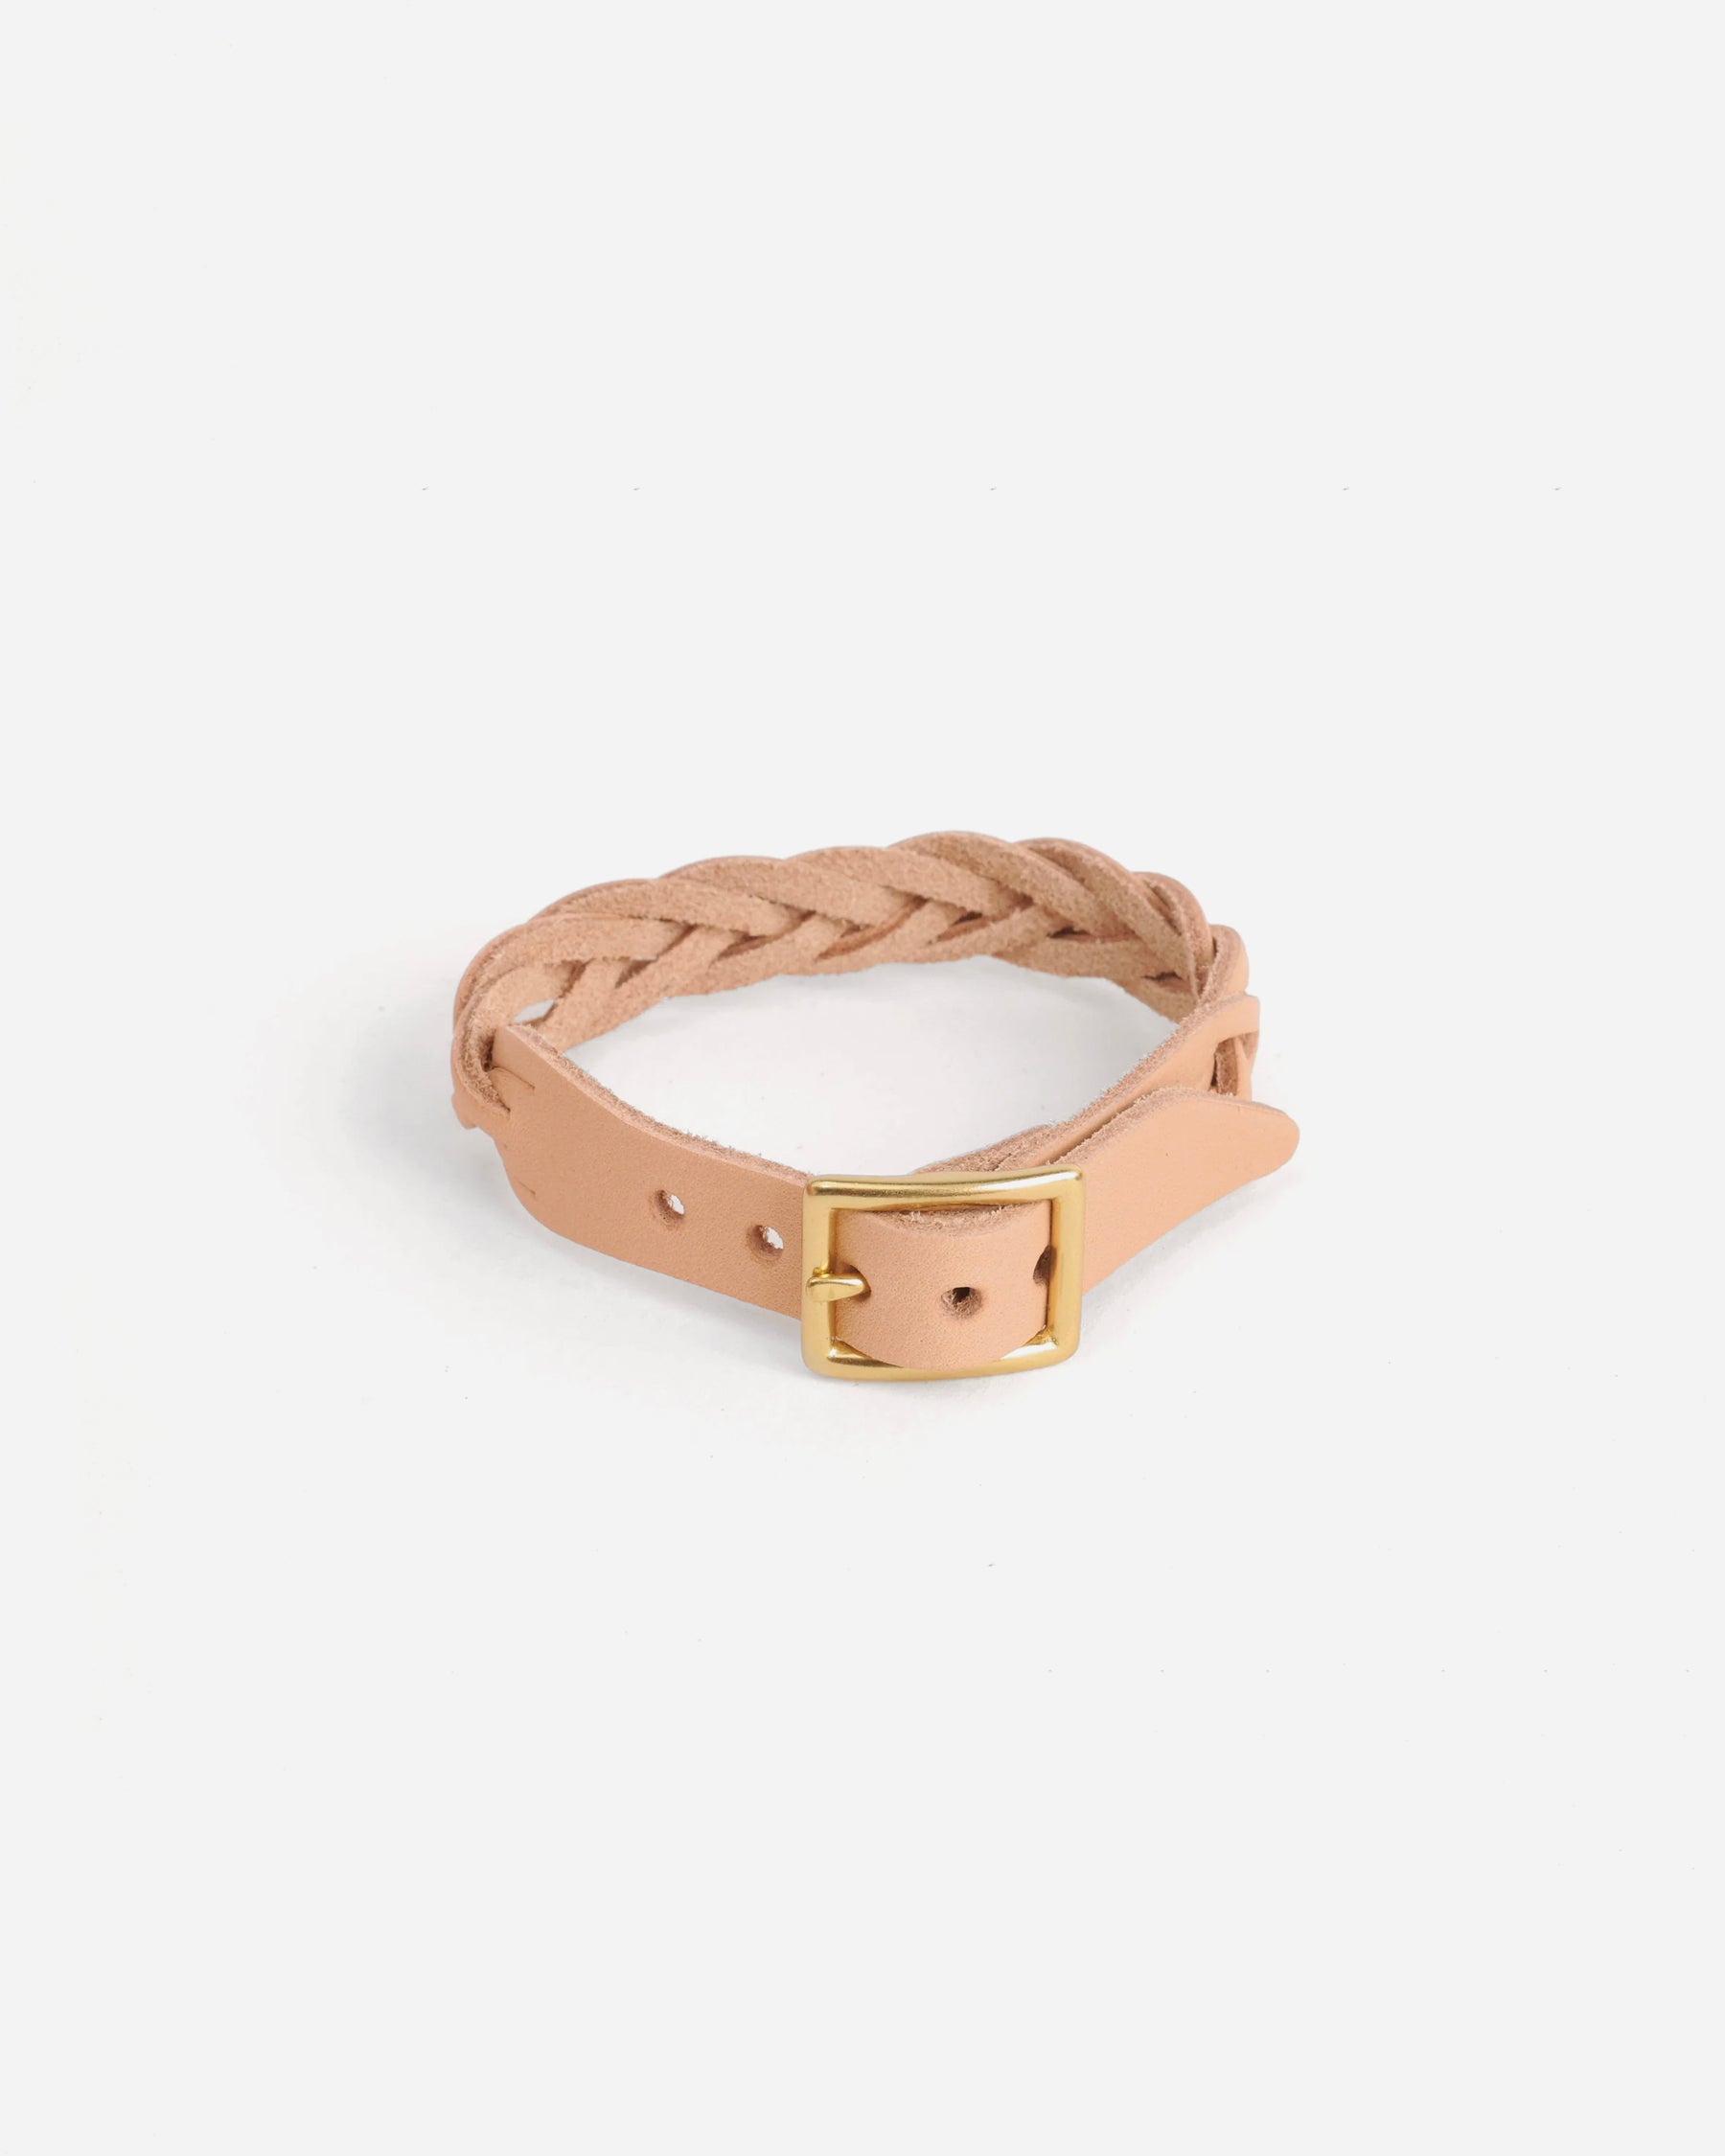 Braided Leather Bracelet - Natural